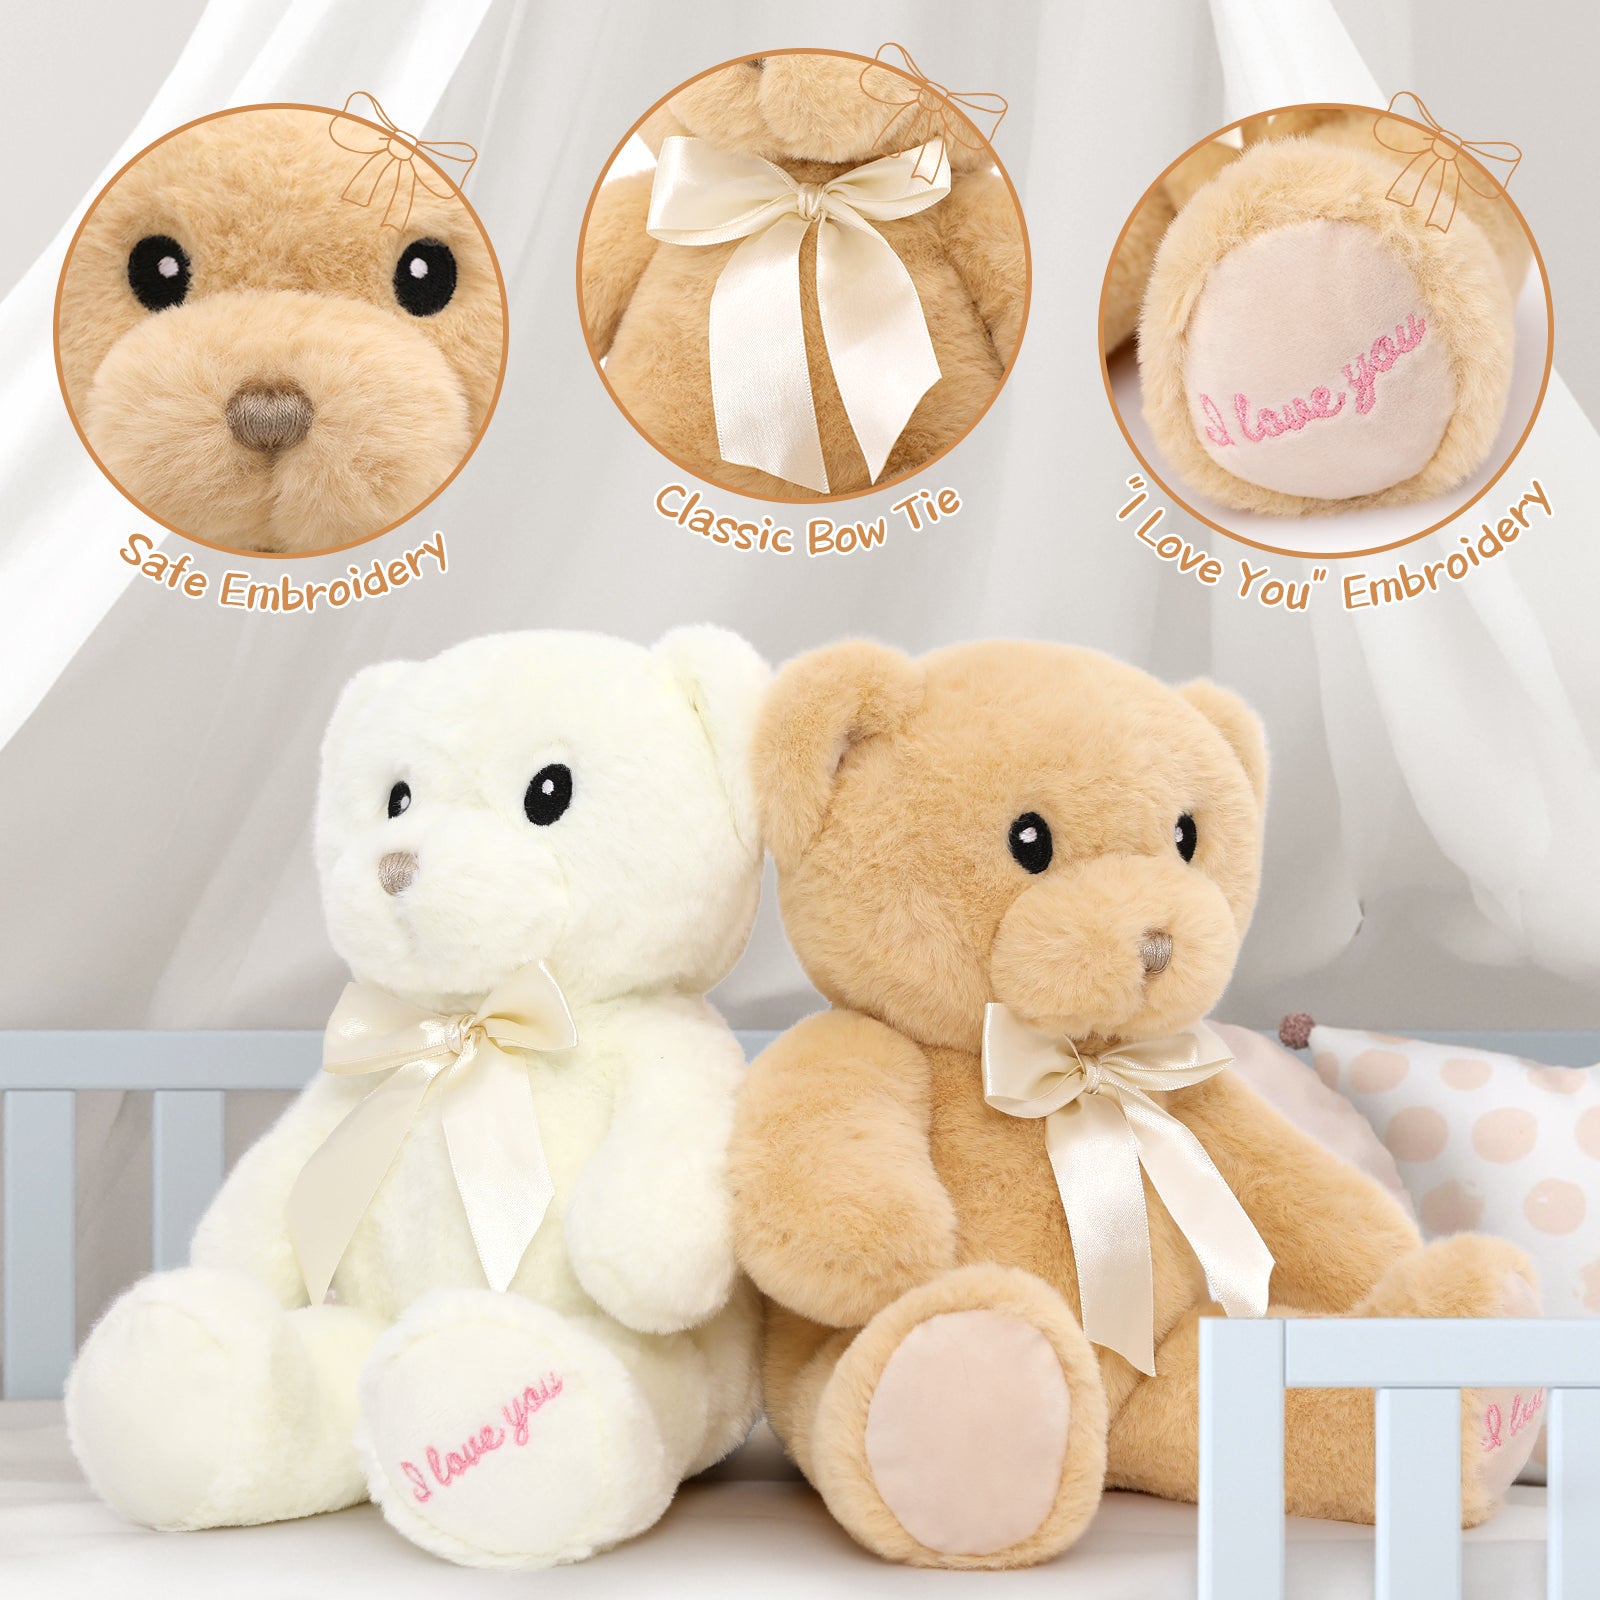 2 Packs of Teddy Bear Stuffed Animal Toy Set, 12 Inches